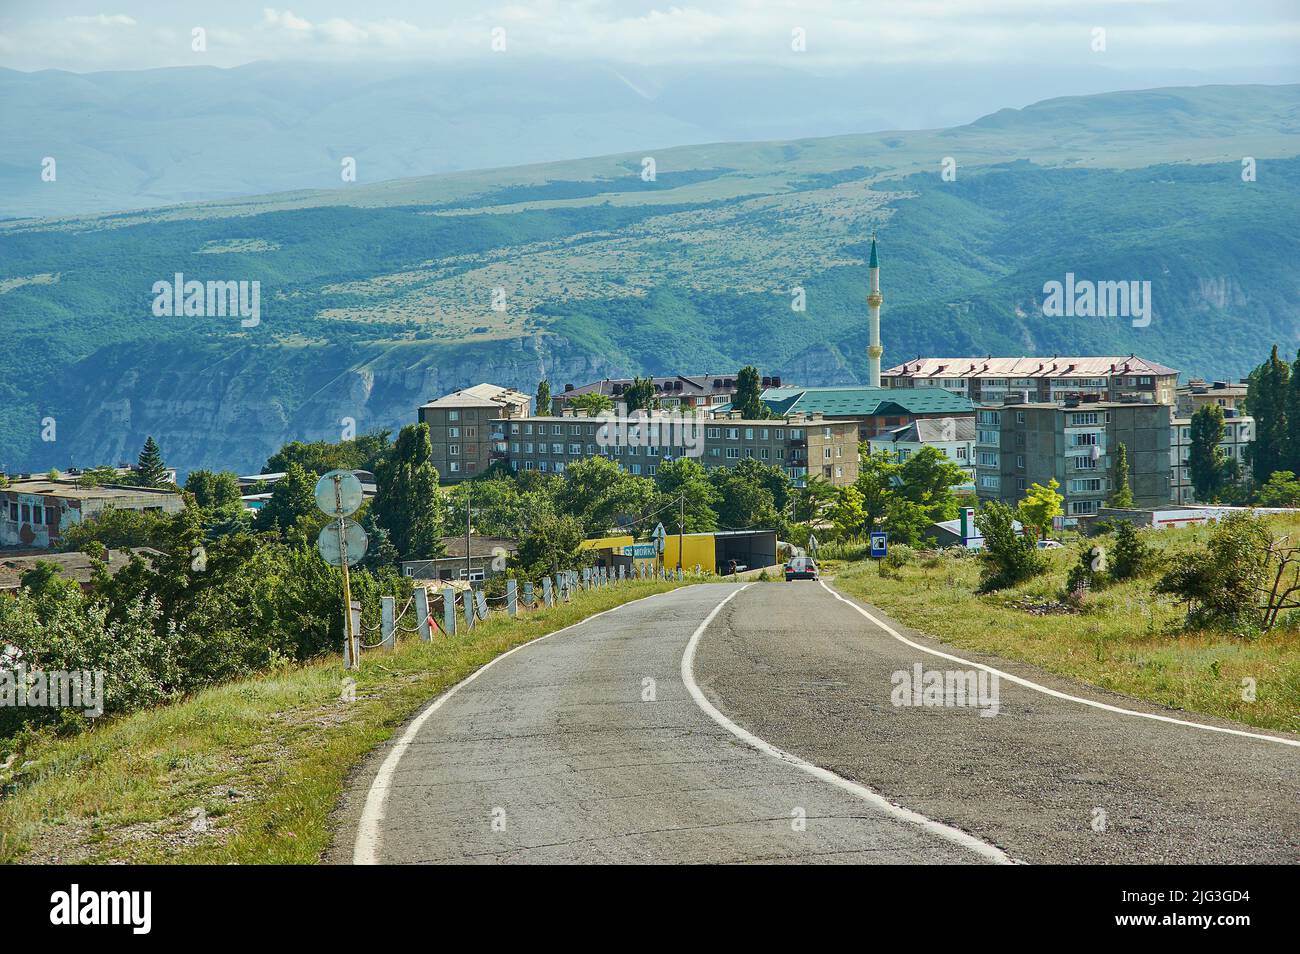 Chirkey reservoir Dagestan, town of Dubki  mountain landscape with dirt road in the vicinity of the reservoir Stock Photo